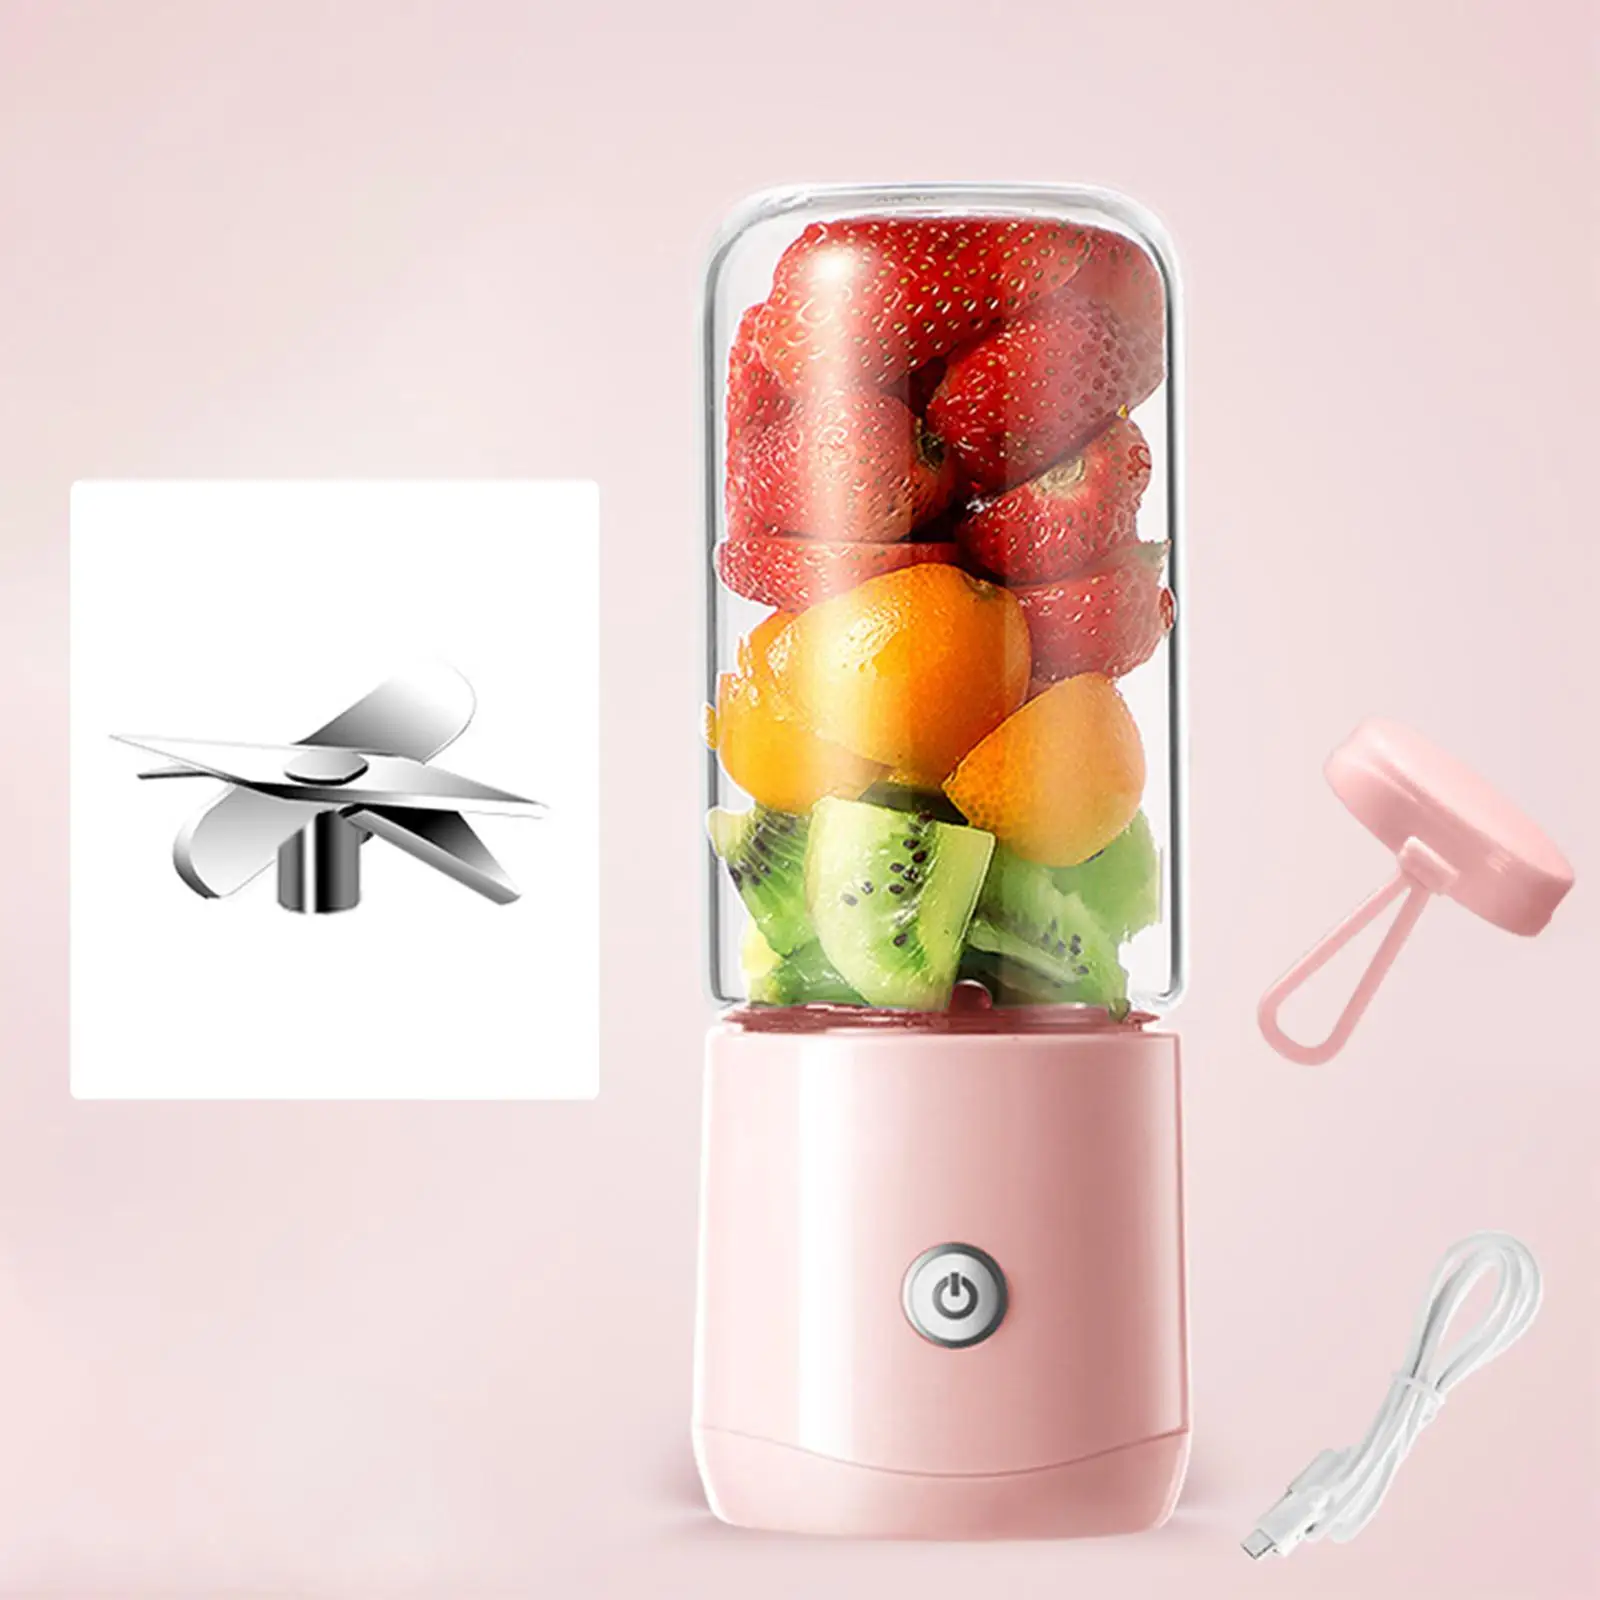 Portable Electric Juicer Cup Extractor USB Charging Food Processor Machine 380ml Stainless Steel Orange Juicer Mixer